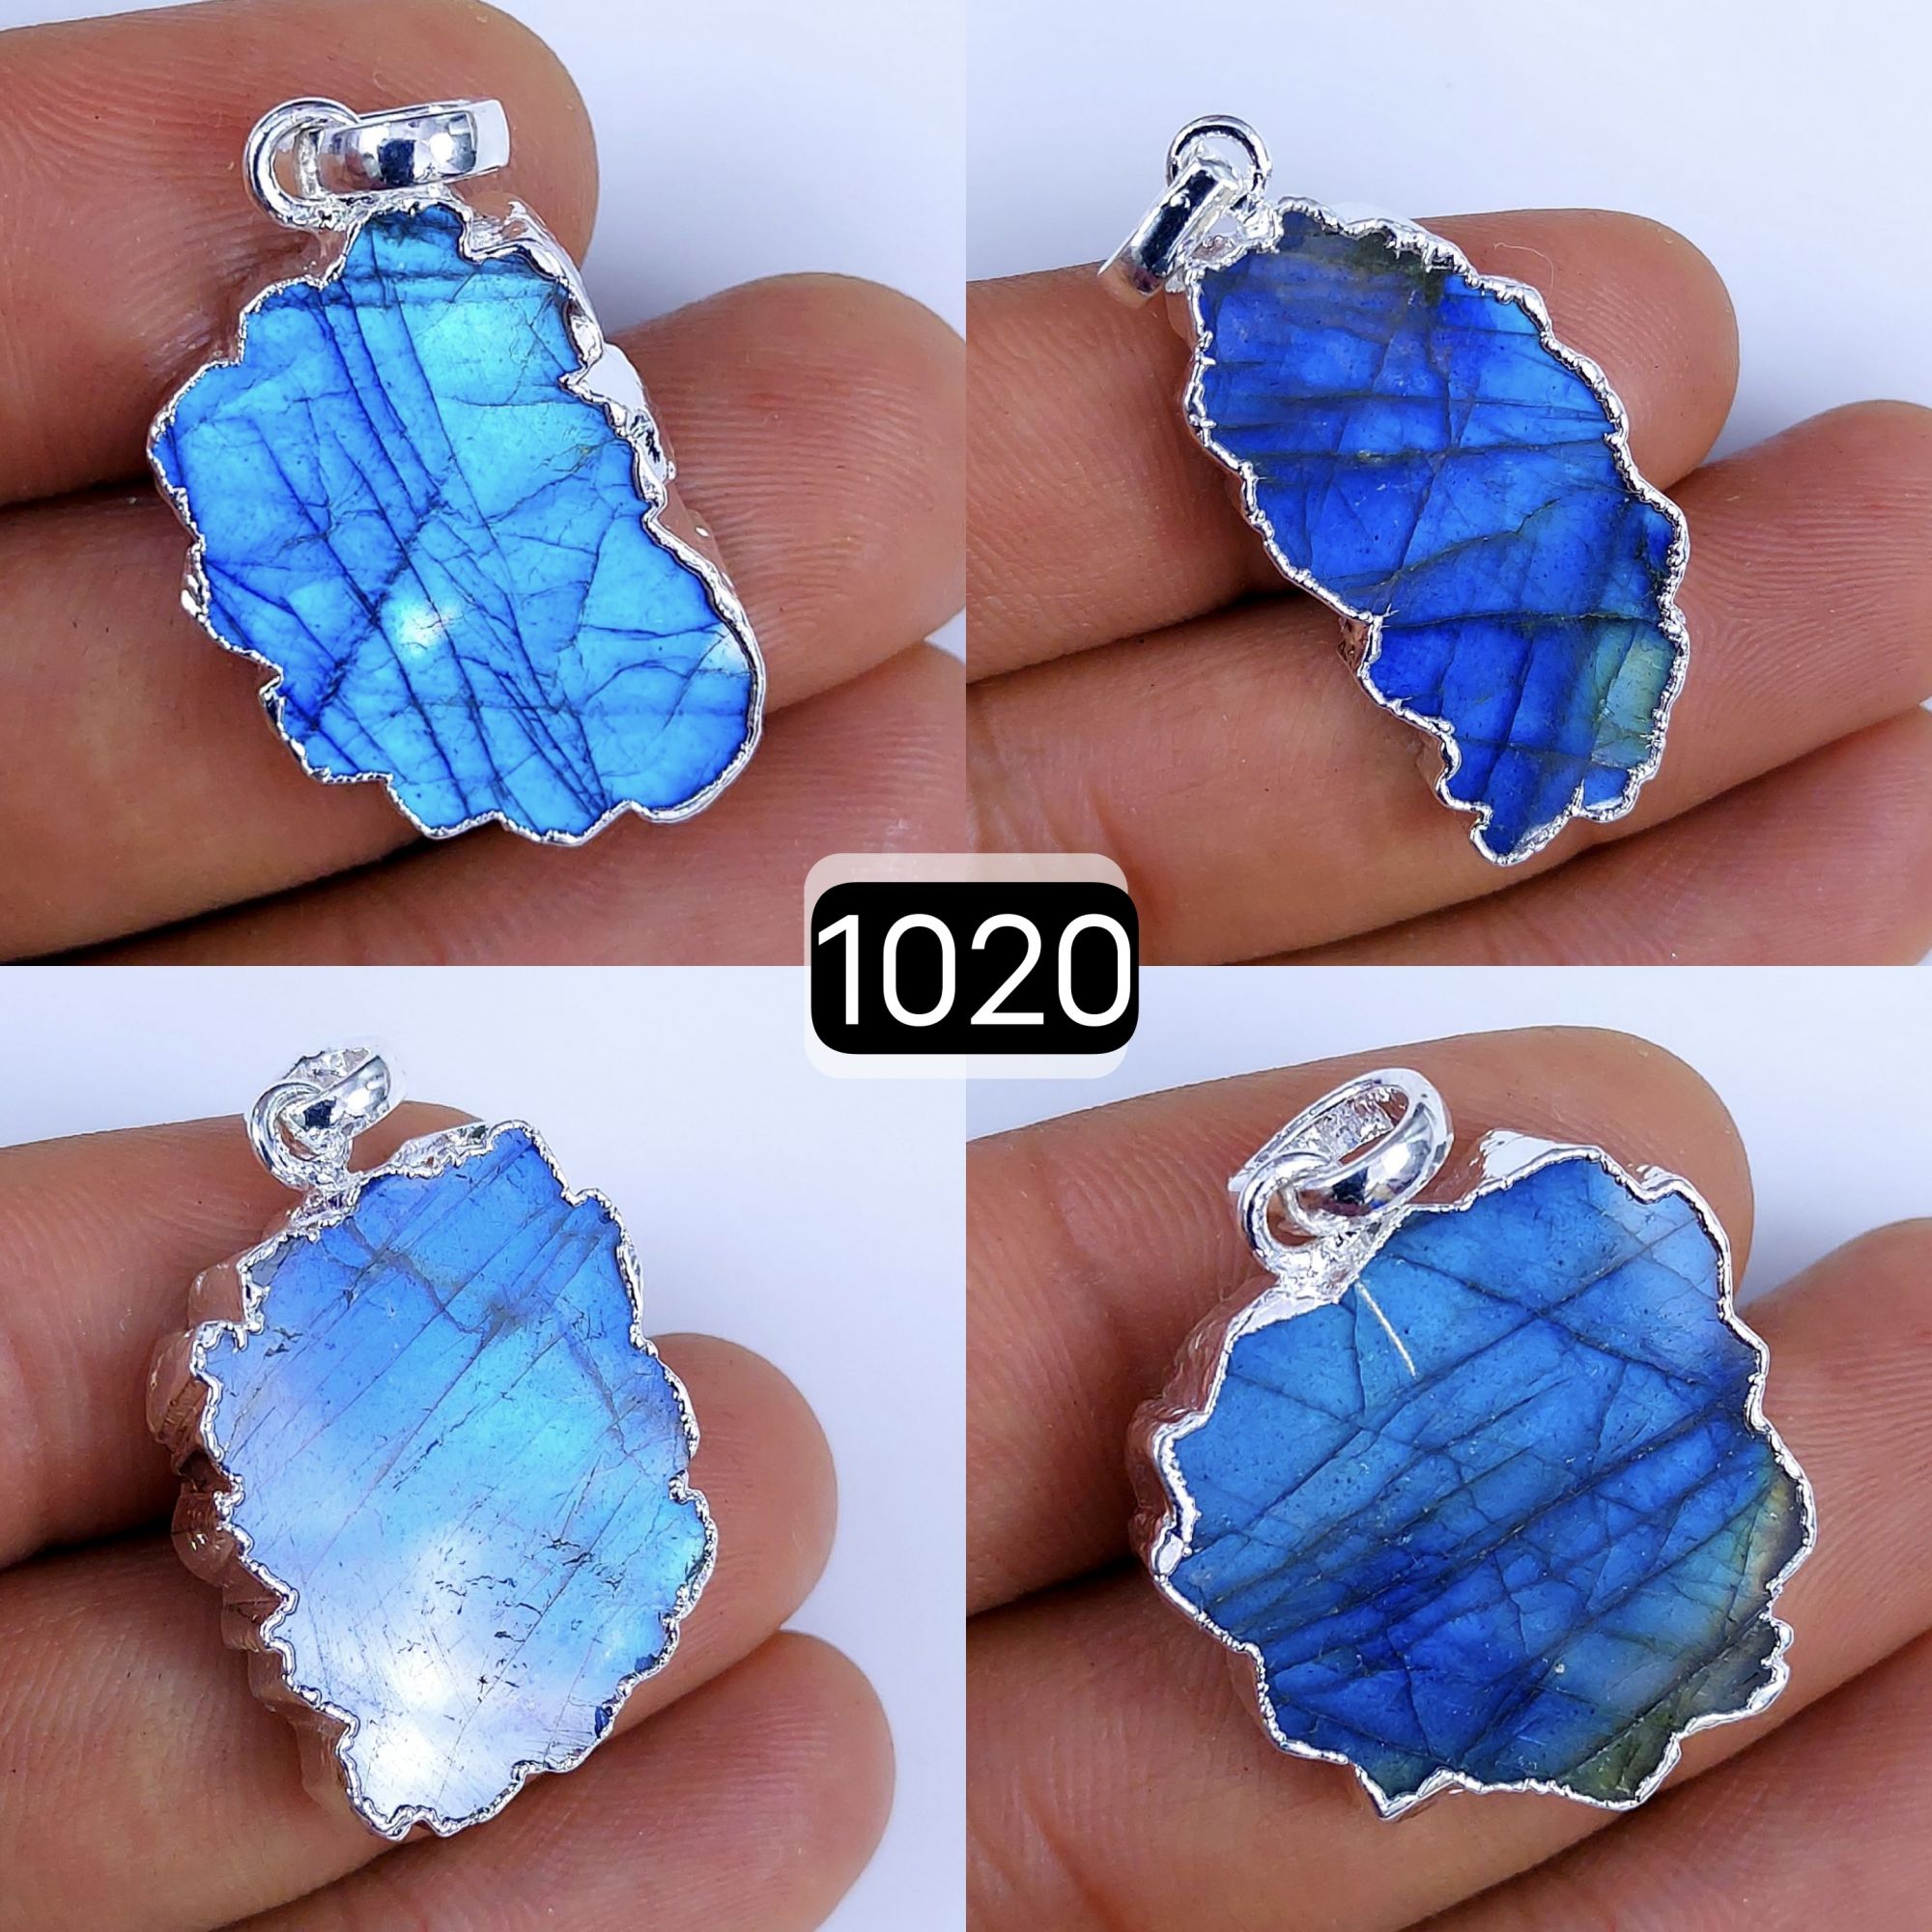 137Cts Natural Blue Labradorite Silver Electroplated Slice Pendant 32x18 22x12mm#1020